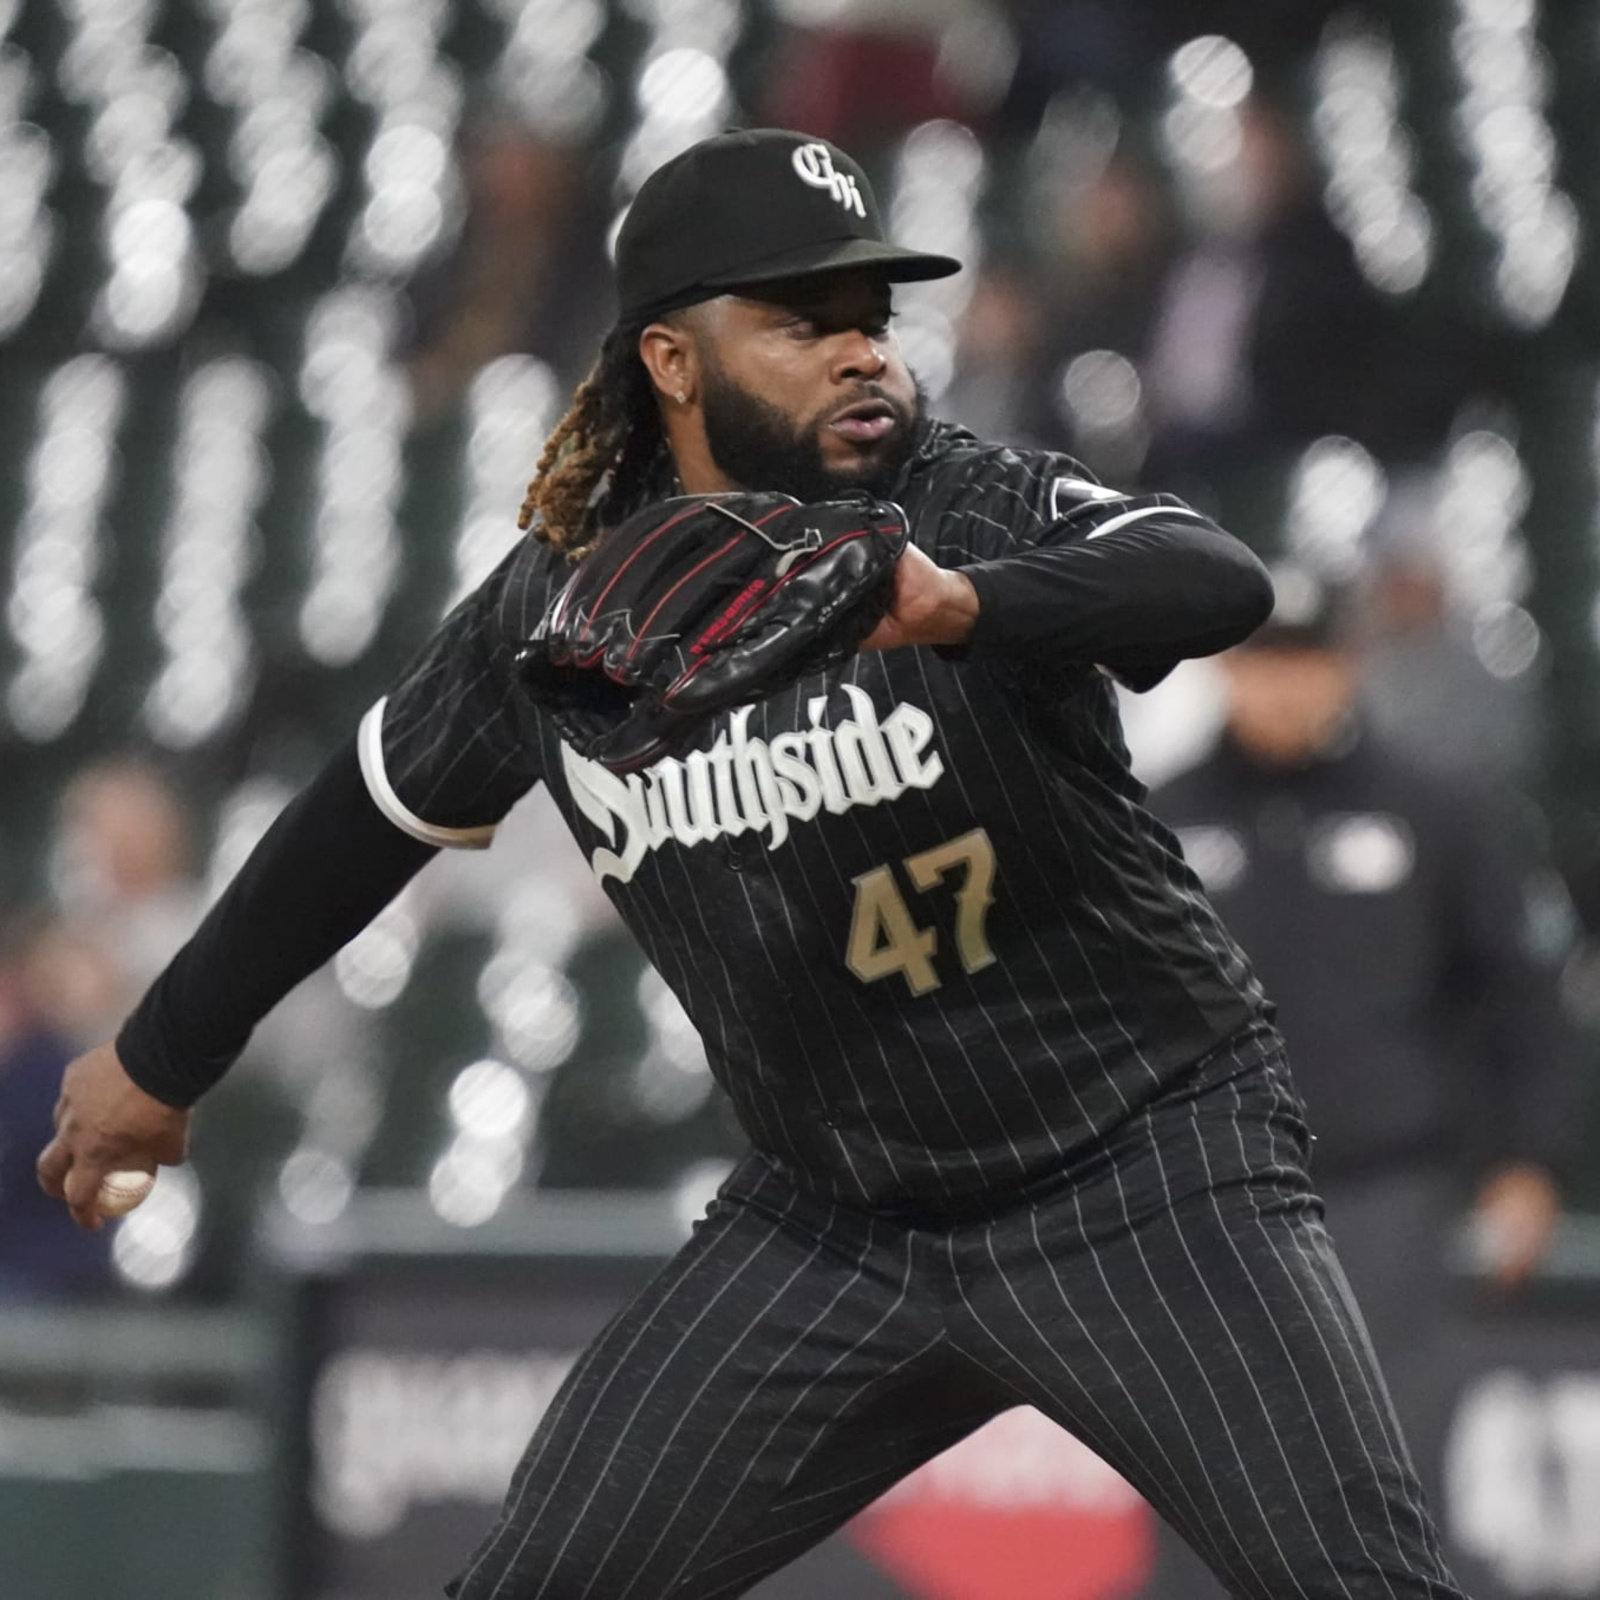 White Sox Sign Johnny Cueto To Minor League Deal - MLB Trade Rumors